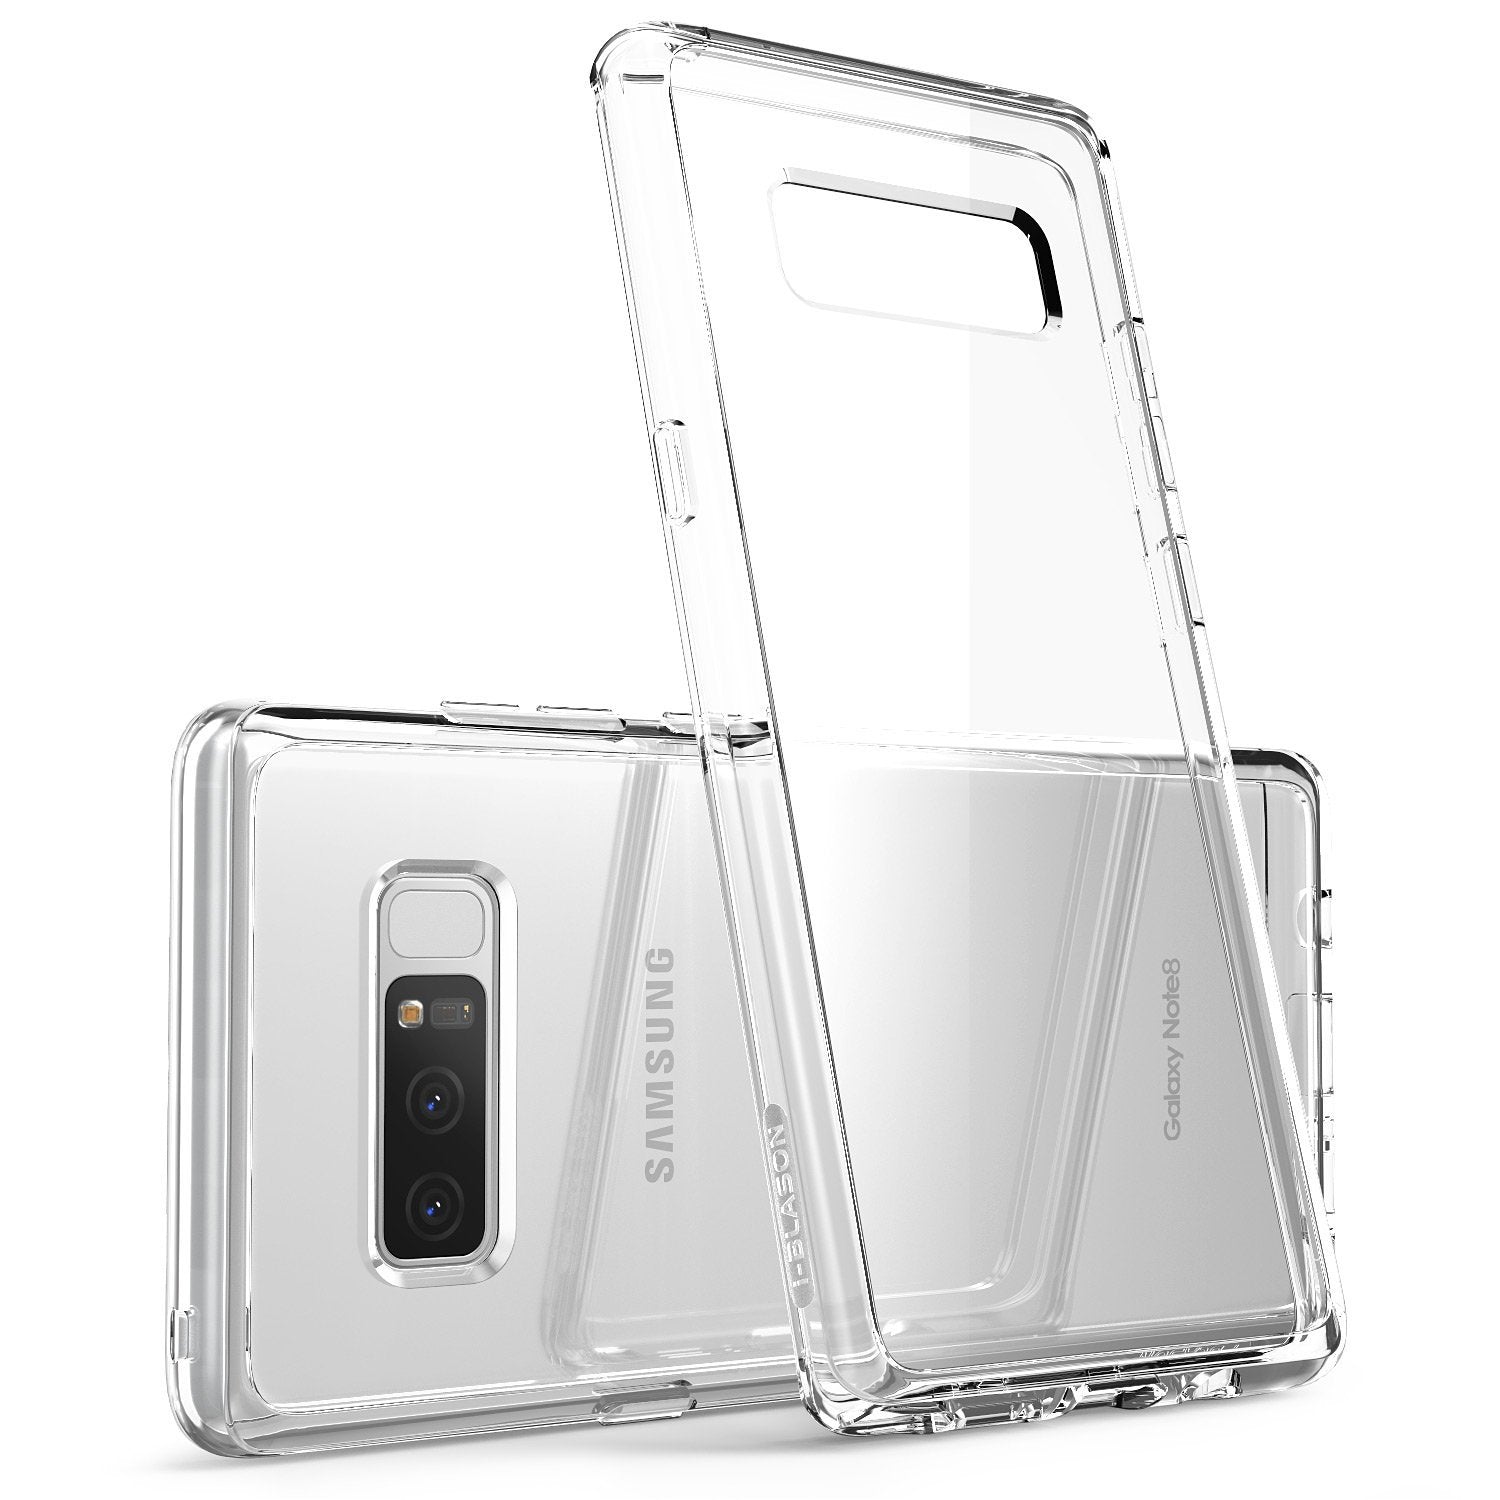 i-Blason Galaxy Note 8 Case, [Scratch Resistant] Clear [Halo Series] Samsung Galaxy Note 8 Hybrid Bumper Case Cover 2017 Release (Clear)